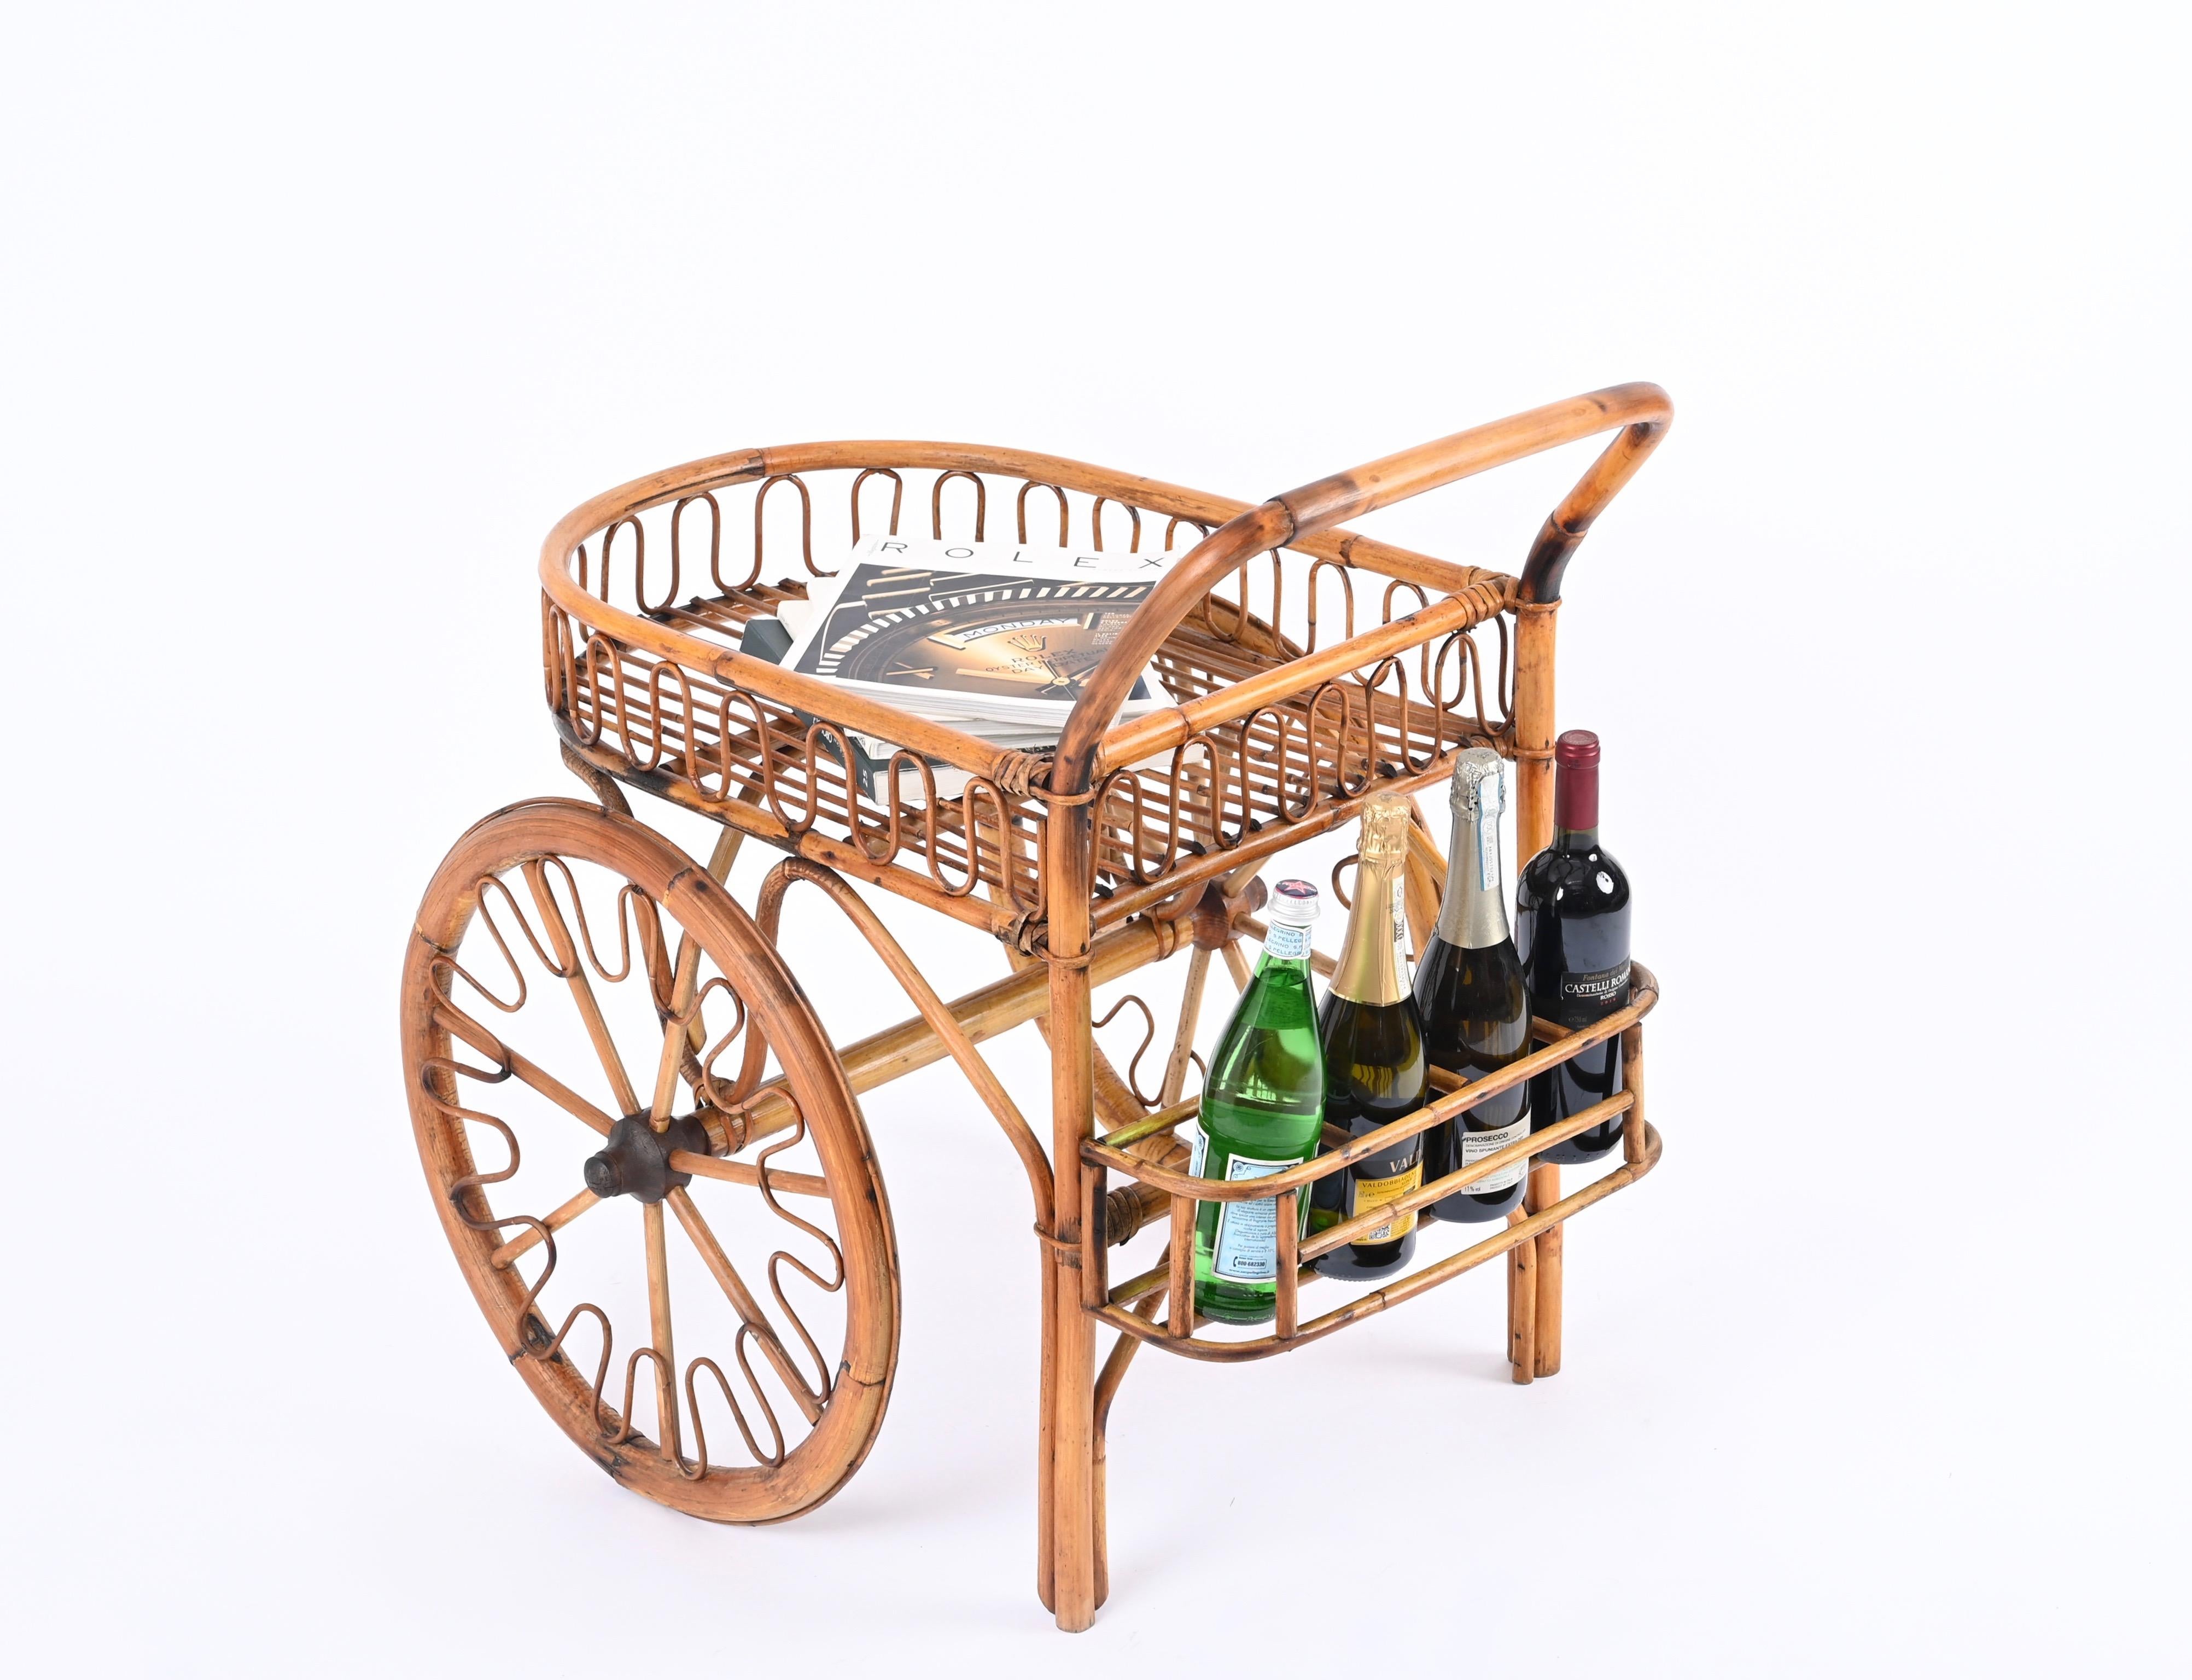 Fabulous Mid-Century bar cart fully made in curved bamboo, rattan and woven wicker. This gorgeous French Riviera trolley was made in France during the 1950s.

This stunning and unique object was fully hand-made with organic materials making it light